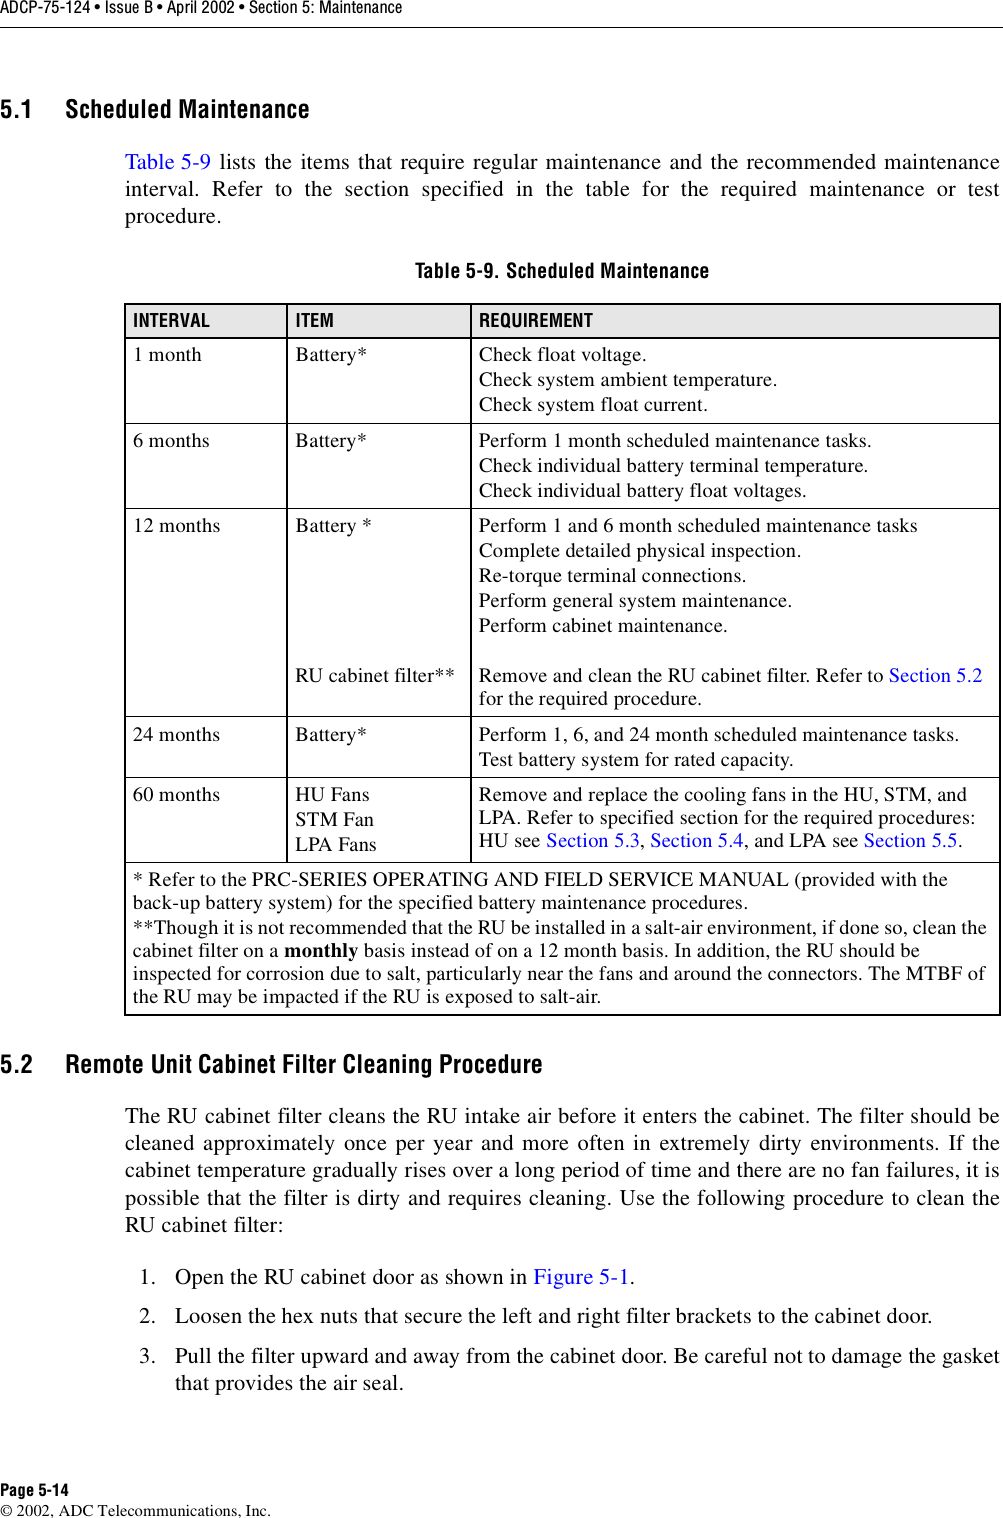 ADCP-75-124 • Issue B • April 2002 • Section 5: MaintenancePage 5-14©2002, ADC Telecommunications, Inc.5.1 Scheduled MaintenanceTable 5-9 lists the items that require regular maintenance and the recommended maintenanceinterval. Refer to the section specified in the table for the required maintenance or testprocedure.5.2 Remote Unit Cabinet Filter Cleaning ProcedureThe RU cabinet filter cleans the RU intake air before it enters the cabinet. The filter should becleaned approximately once per year and more often in extremely dirty environments. If thecabinet temperature gradually rises over along period of time and there are no fan failures, it ispossible that the filter is dirty and requires cleaning. Use the following procedure to clean theRU cabinet filter:1. Open the RU cabinet door as shown in Figure 5-1.2. Loosen the hex nuts that secure the left and right filter brackets to the cabinet door.3. Pull the filter upward and away from the cabinet door. Be careful not to damage the gasketthat provides the air seal.Table 5-9. Scheduled MaintenanceINTERVAL ITEM REQUIREMENT1month Battery* Check float voltage.Check system ambient temperature.Check system float current.6months Battery* Perform 1month scheduled maintenance tasks.Check individual battery terminal temperature.Check individual battery float voltages.12 months Battery *RU cabinet filter**Perform 1and 6month scheduled maintenance tasksComplete detailed physical inspection.Re-torque terminal connections.Perform general system maintenance.Perform cabinet maintenance.Remove and clean the RU cabinet filter. Refer to Section 5.2for the required procedure.24 months Battery* Perform 1, 6, and 24 month scheduled maintenance tasks.Test battery system for rated capacity.60 months HU FansSTM FanLPA FansRemove and replace the cooling fans in the HU, STM, andLPA. Refer to specified section for the required procedures:HU see Section 5.3,Section 5.4,and LPA see Section 5.5.*Refer to the PRC-SERIES OPERATING AND FIELD SERVICE MANUAL (provided with theback-up battery system) for the specified battery maintenance procedures.**Though it is not recommended that the RU be installed in asalt-air environment, if done so, clean thecabinet filter on amonthly basis instead of on a12 month basis. In addition, the RU should beinspected for corrosion due to salt, particularly near the fans and around the connectors. The MTBF ofthe RU may be impacted if the RU is exposed to salt-air.